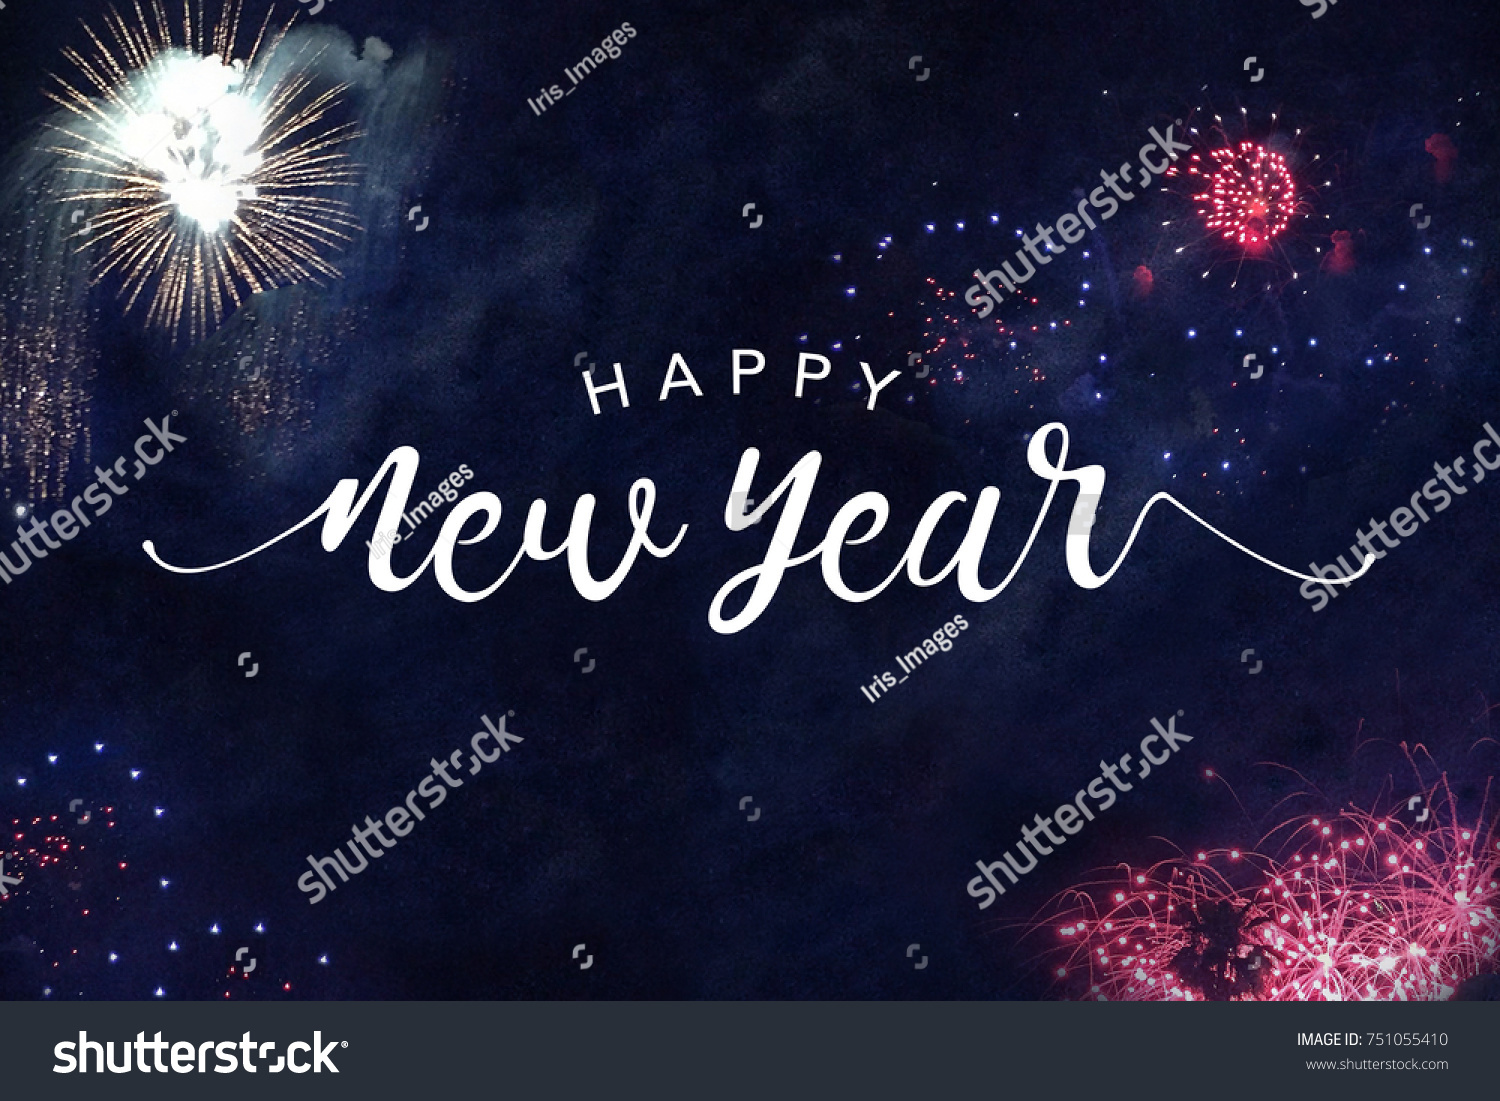 Happy New Year Typography with Fireworks in Night Sky #751055410